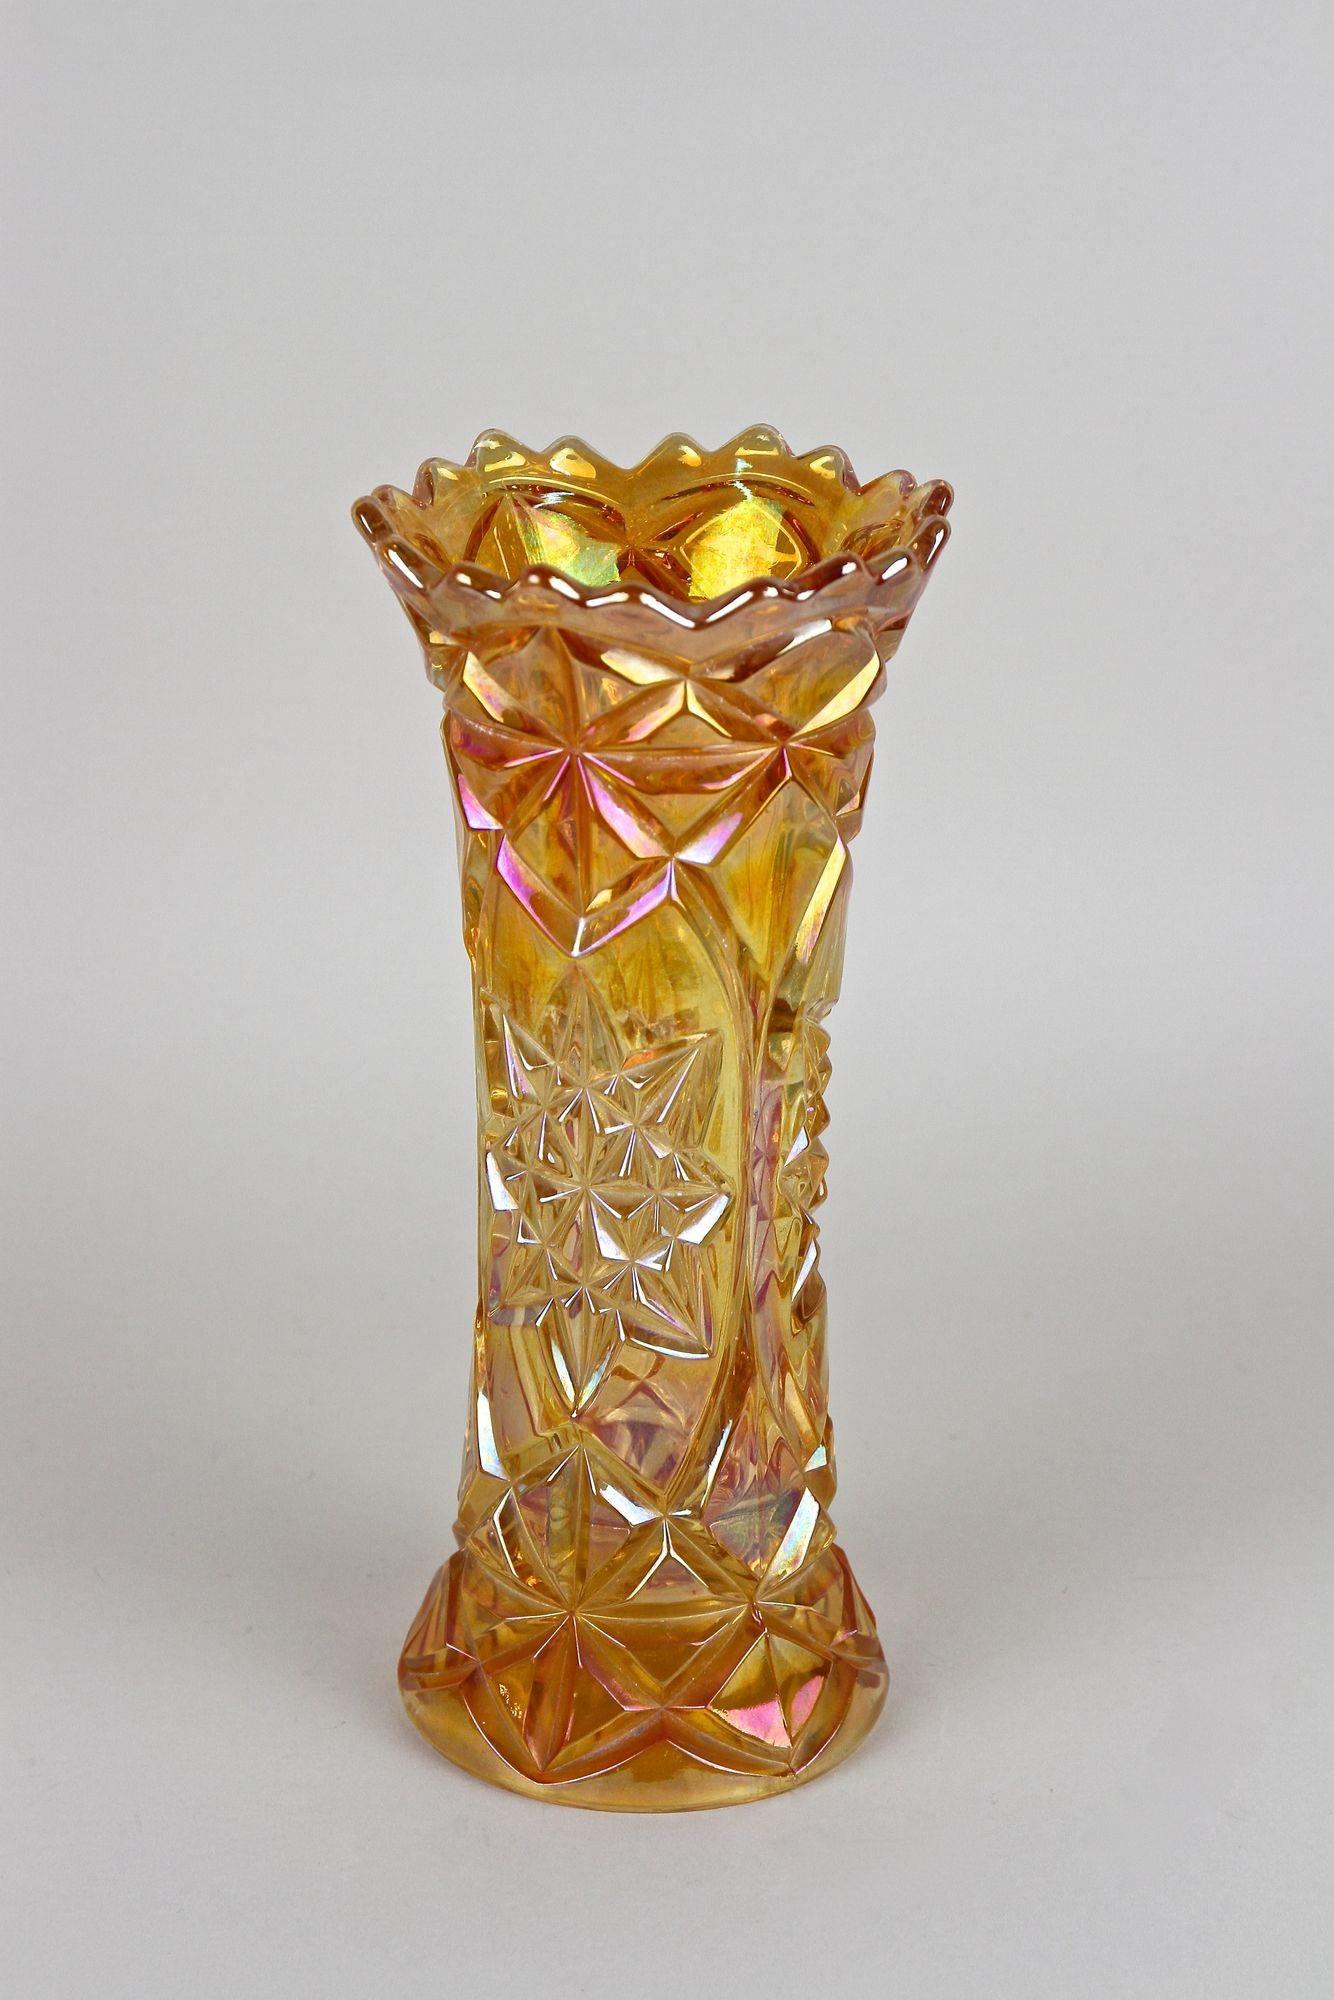 Extraordinary Art Deco glass vase from the early 20th century around 1930 in Bohemia (Czech Republic). A remarkable, eye-catching designed bohemian glass vase made of amber colored glass. Its artfully shaped body impresses with fantastic looking